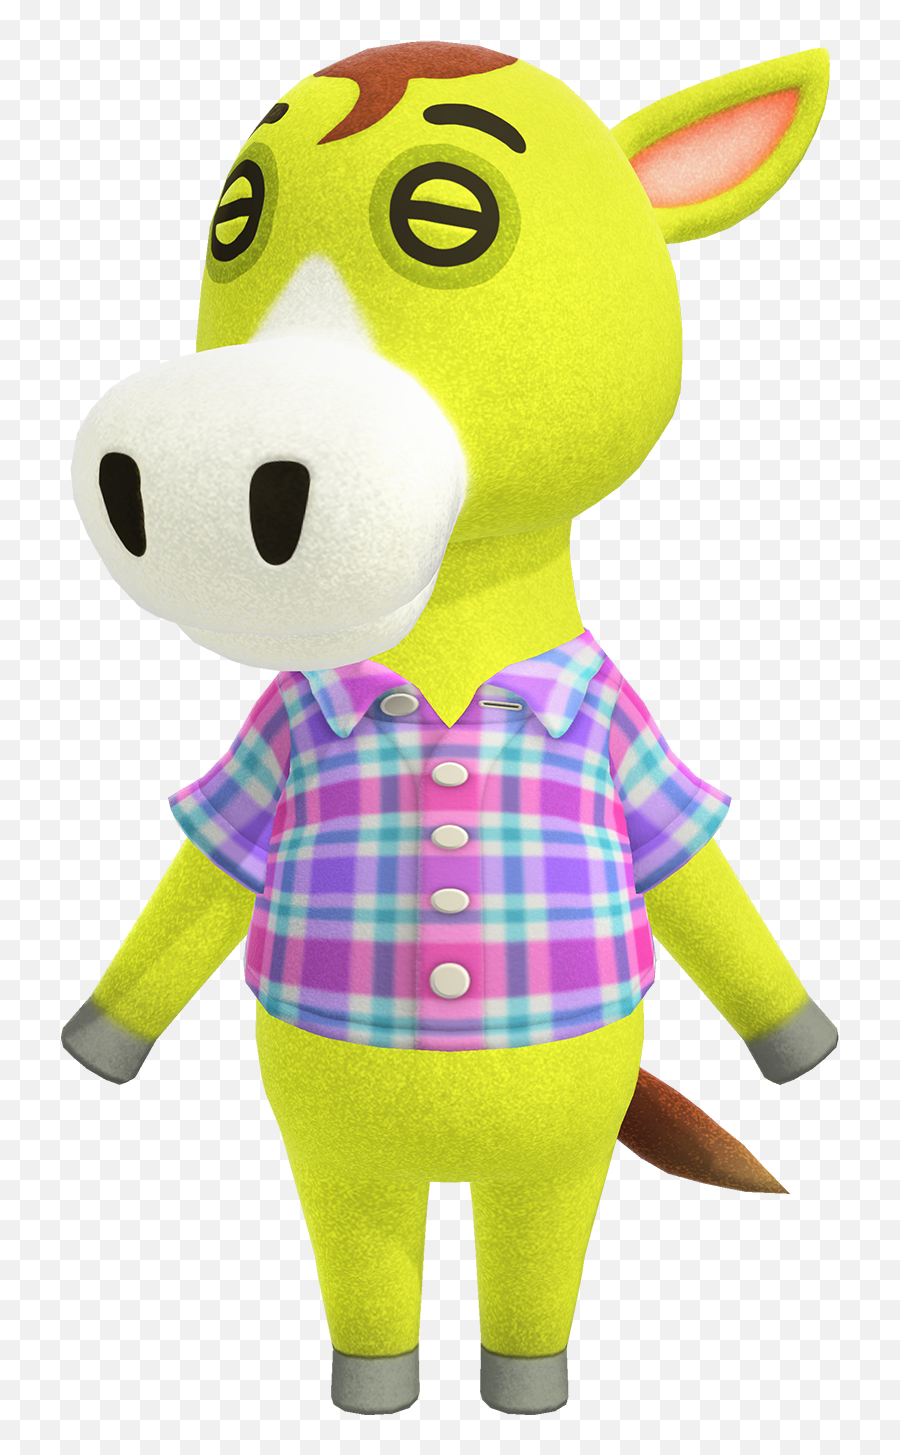 Clyde - Animal Crossing Wiki Nookipedia Clyde The Horse Animal Crossing Emoji,Nightgown Emotion Gallery